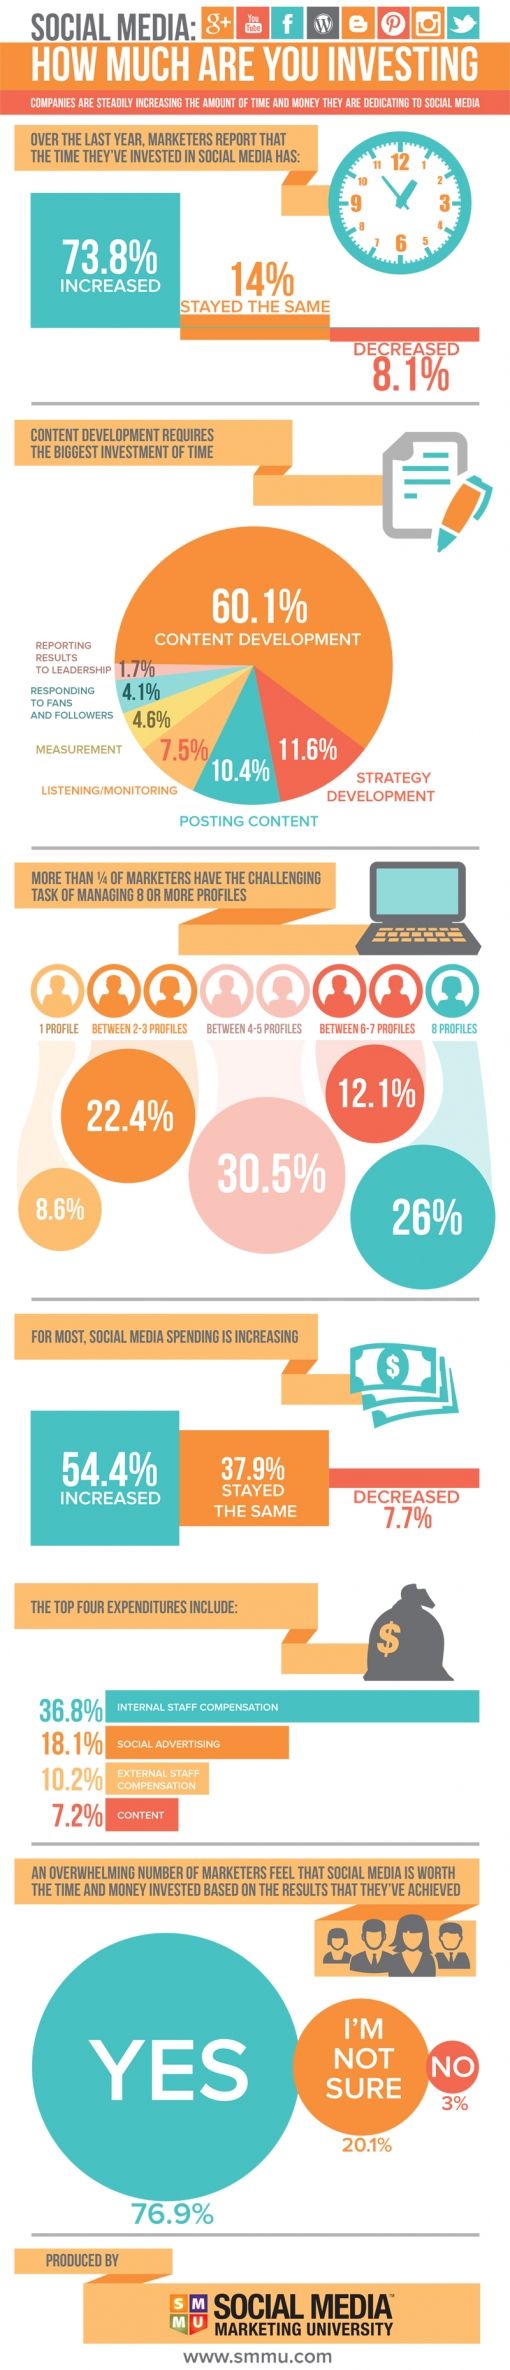 social-media-how-much-are-you-investing.jpg